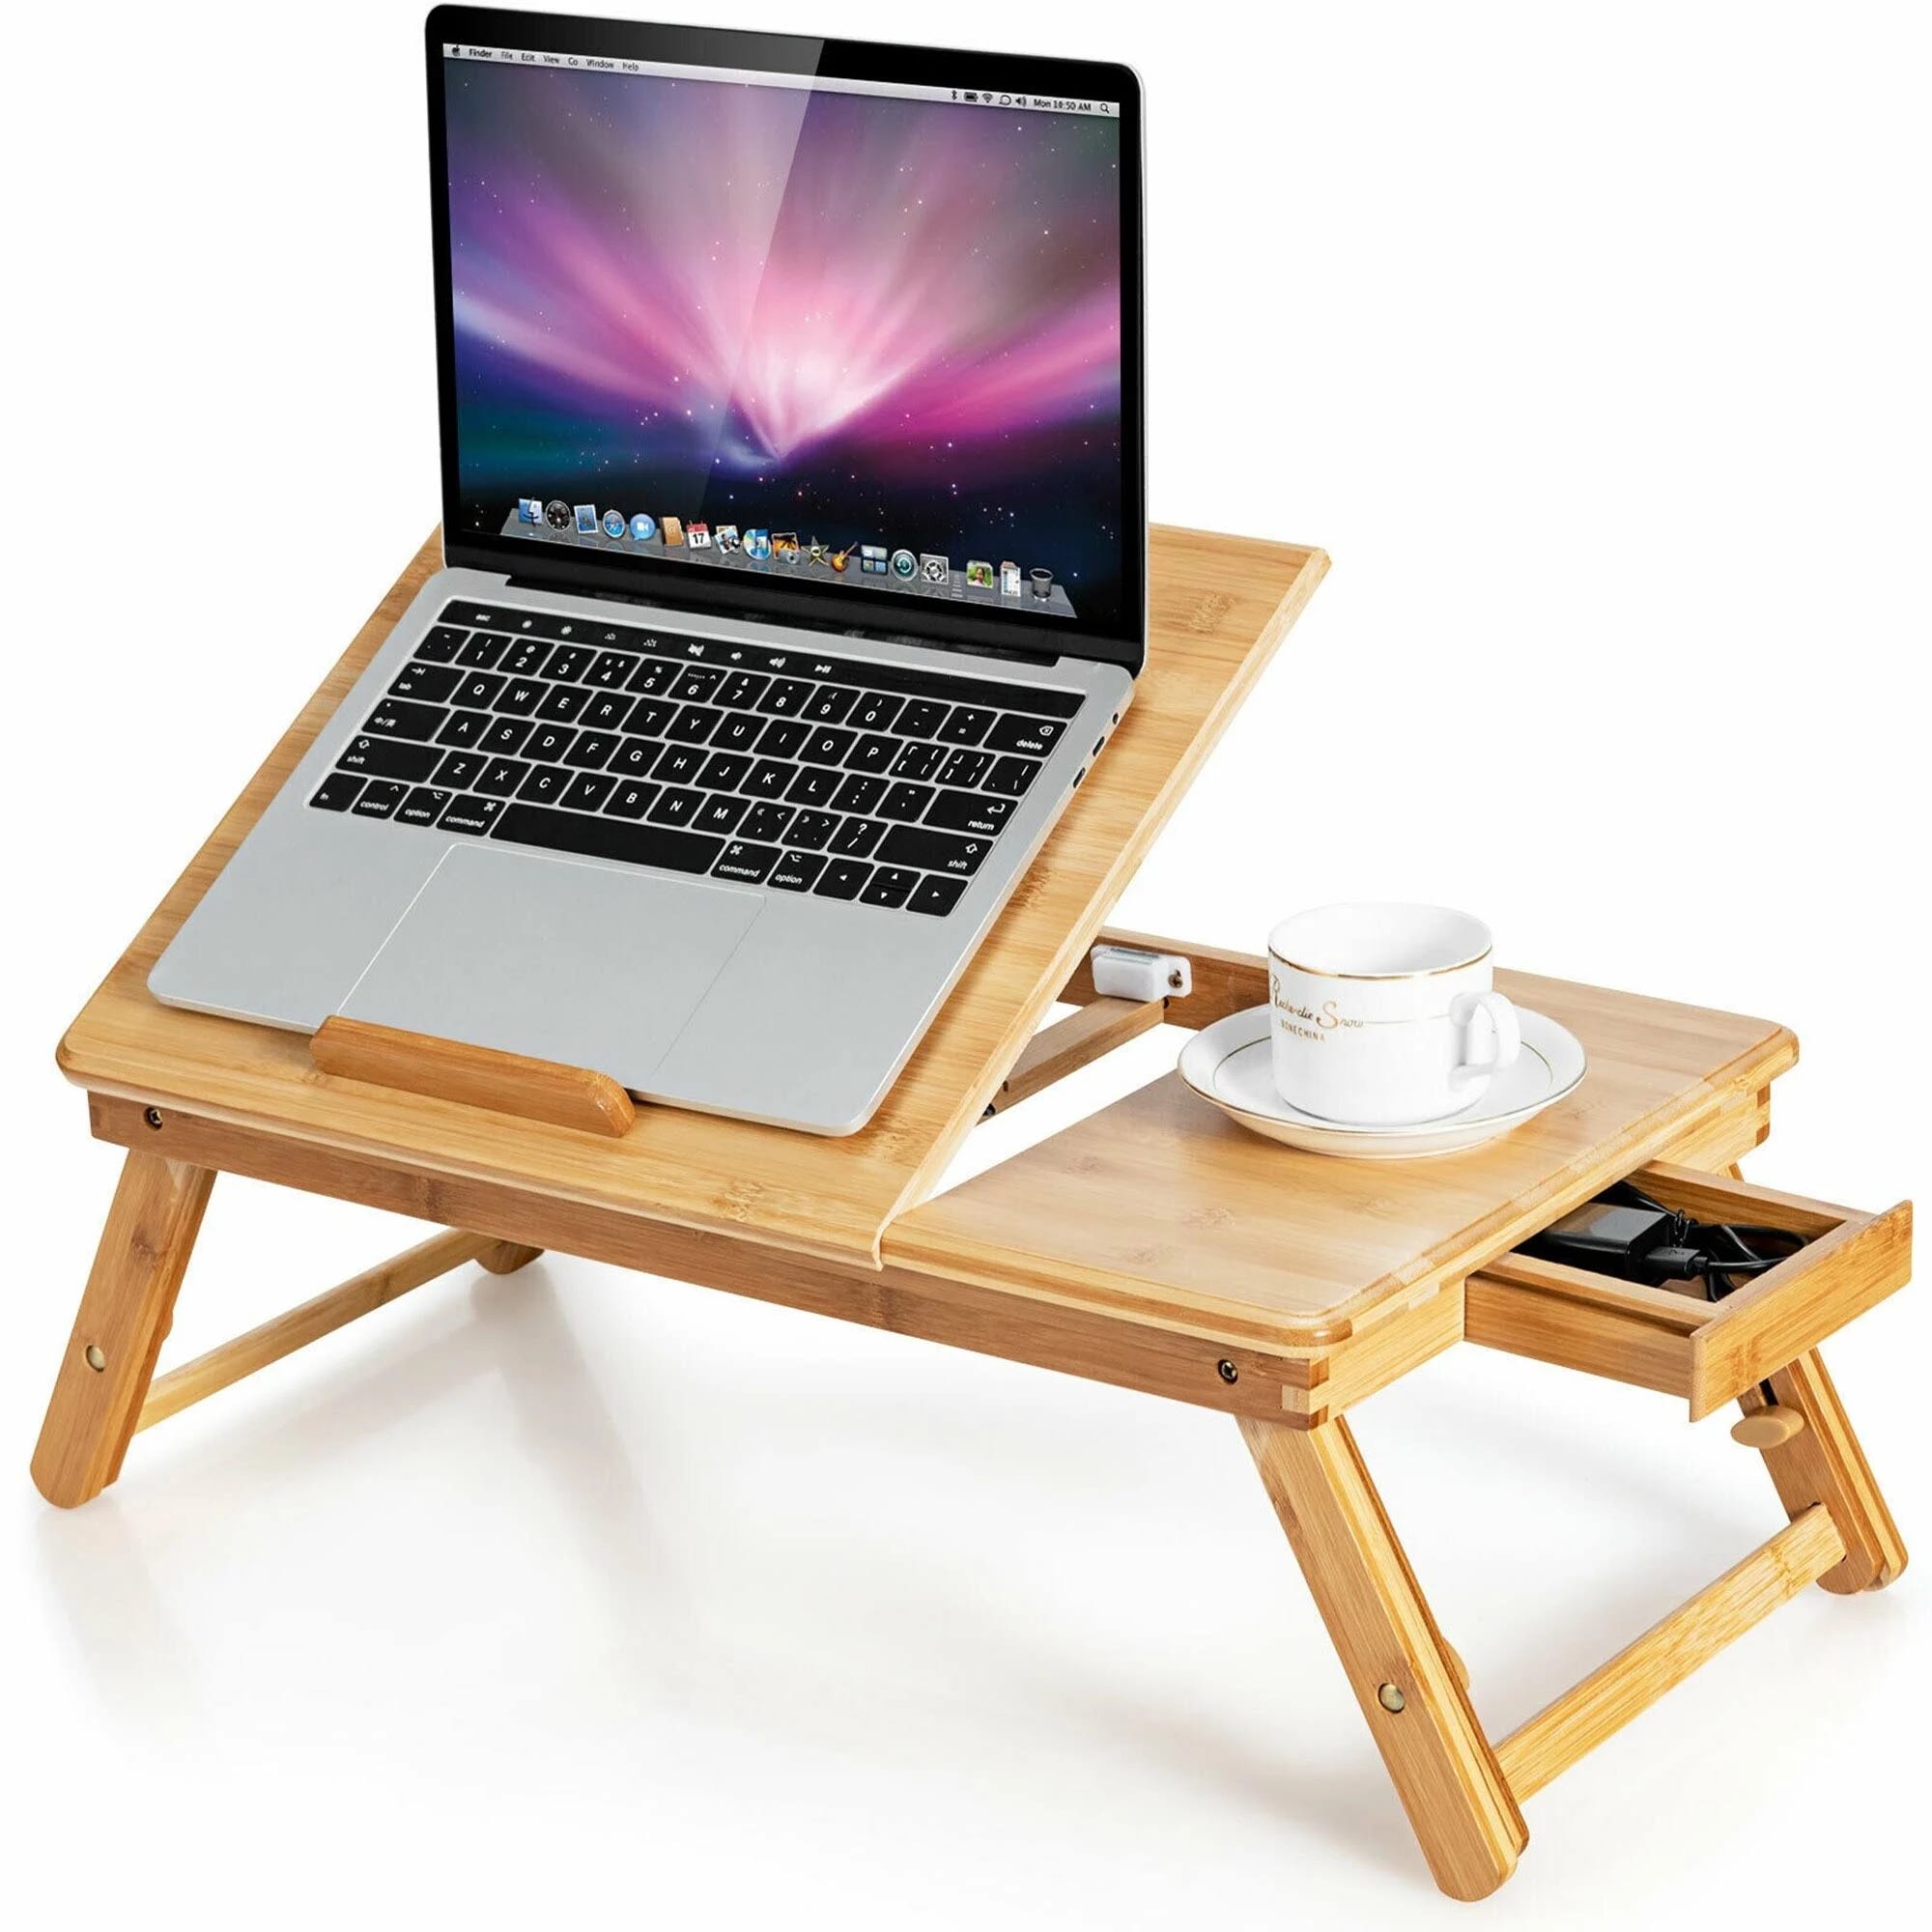 Adjustable Bamboo Laptop Bed Tray for Multifunctional Use | Image